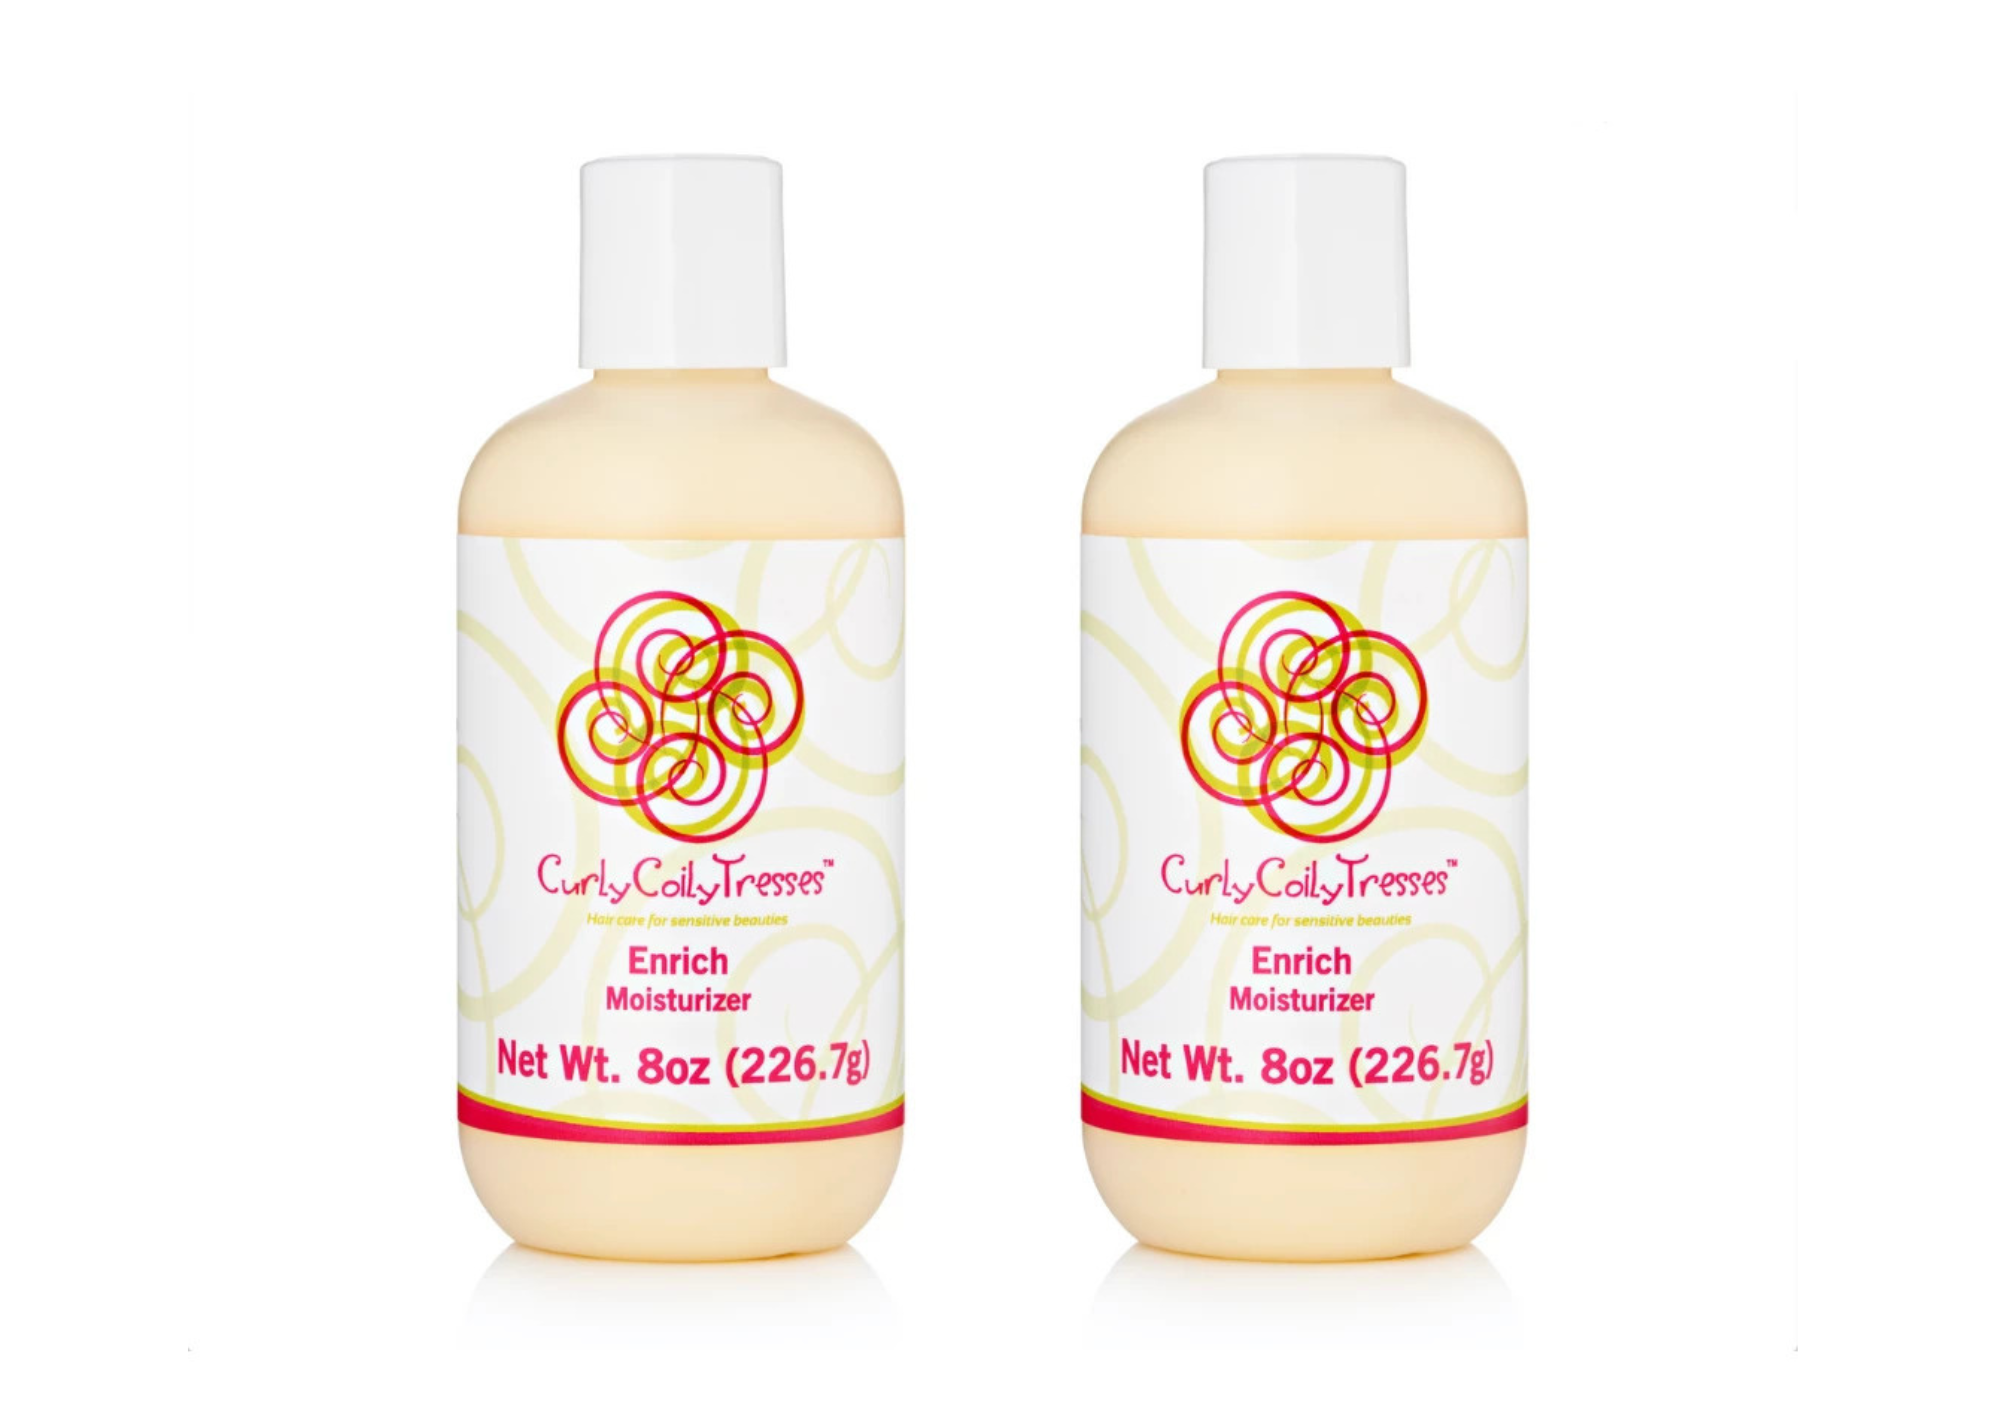 CurlyCoilyTresses products